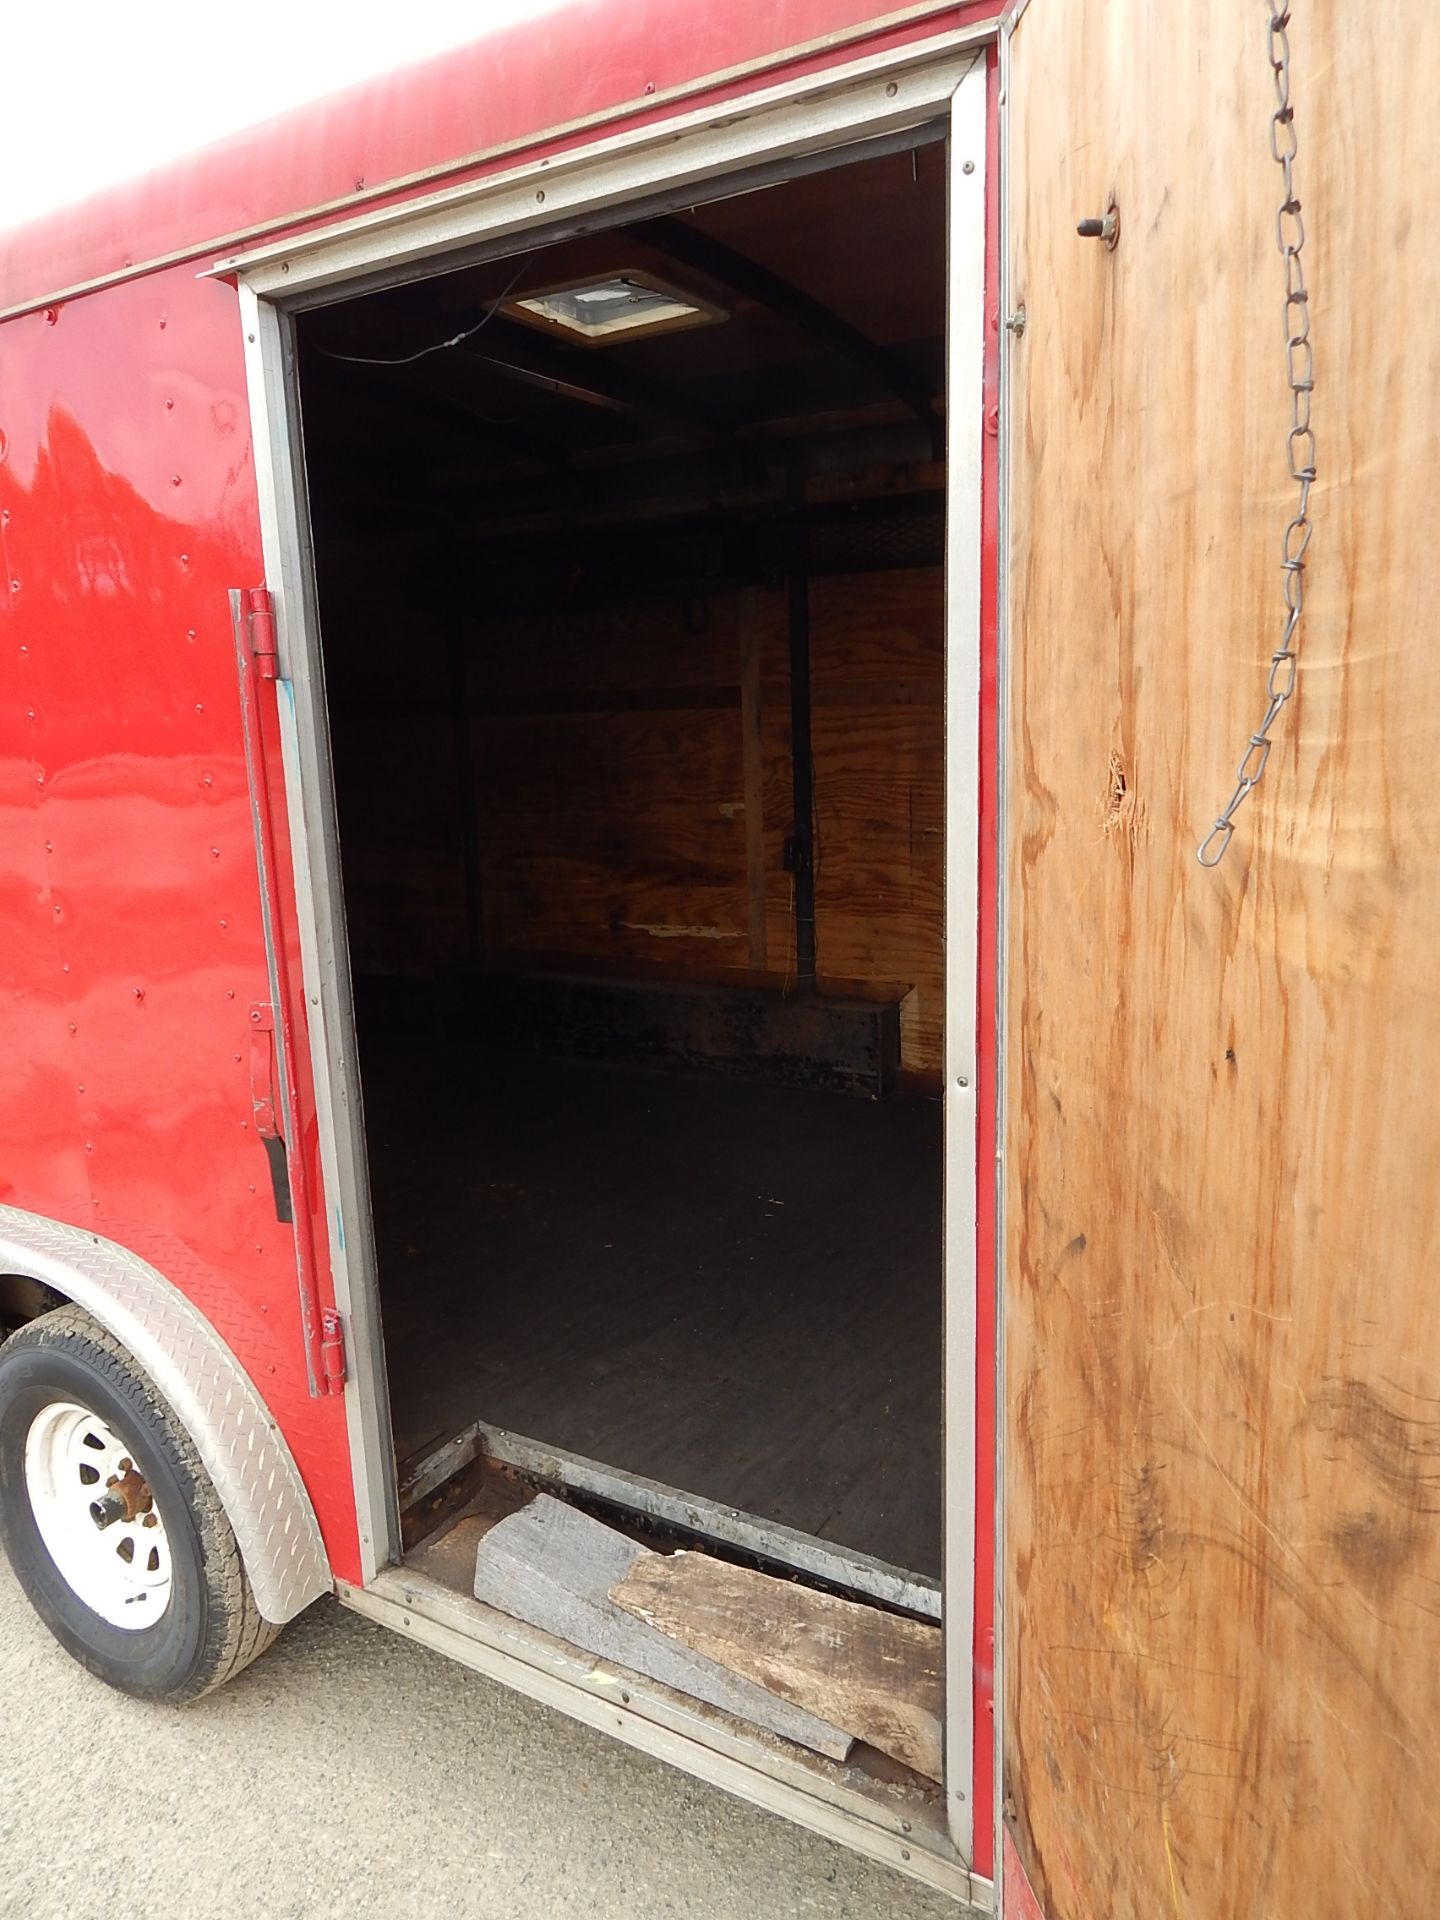 2001 Continental Tandem Axle Enclosed Cargo Trailer, VIN 4X4TSEV28IN018419, Double Doors in the - Image 11 of 21